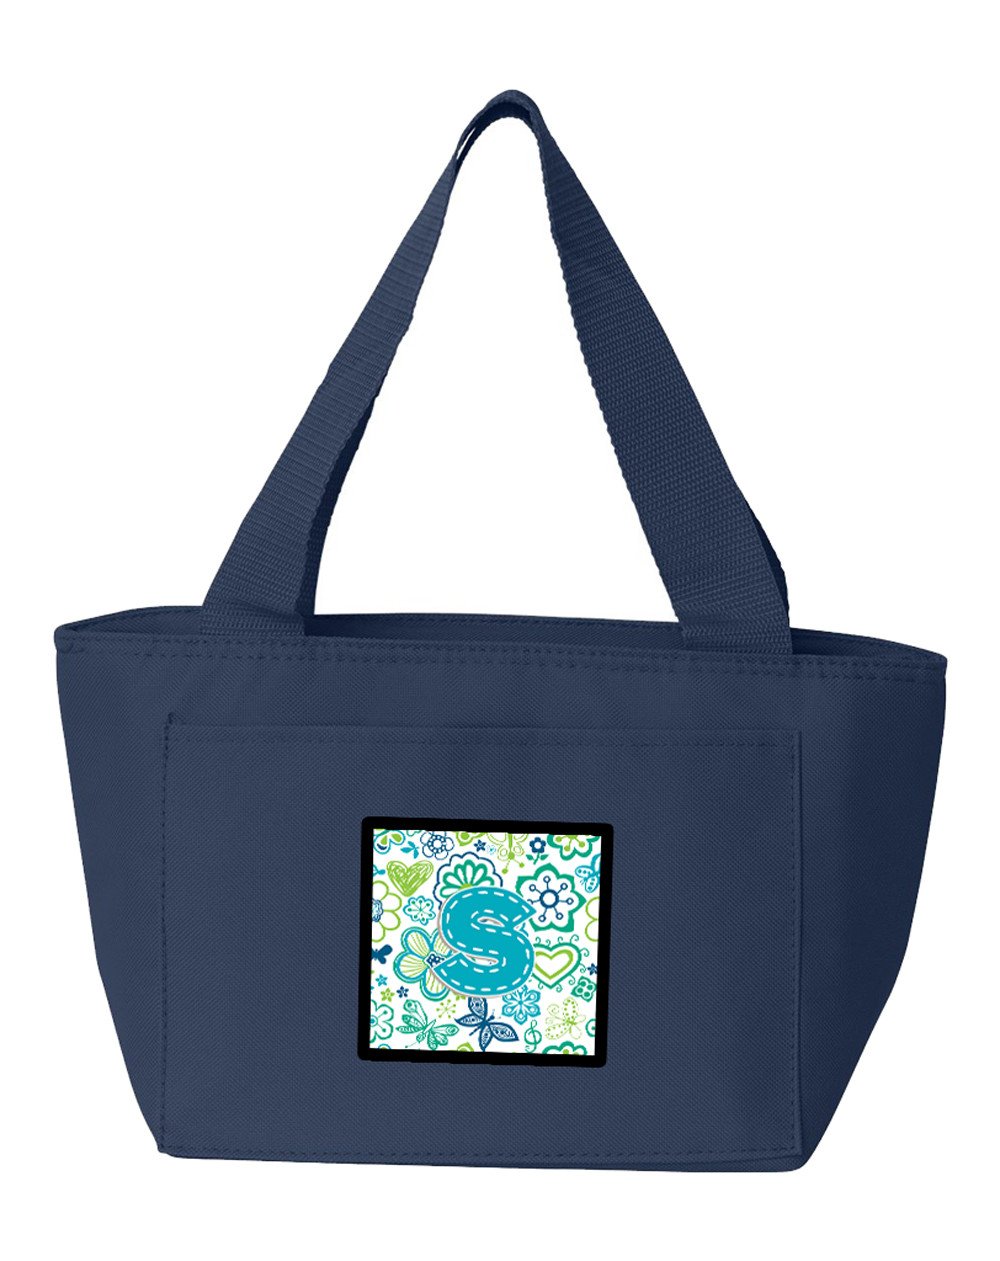 Letter S Flowers and Butterflies Teal Blue Lunch Bag CJ2006-SNA-8808 by Caroline's Treasures